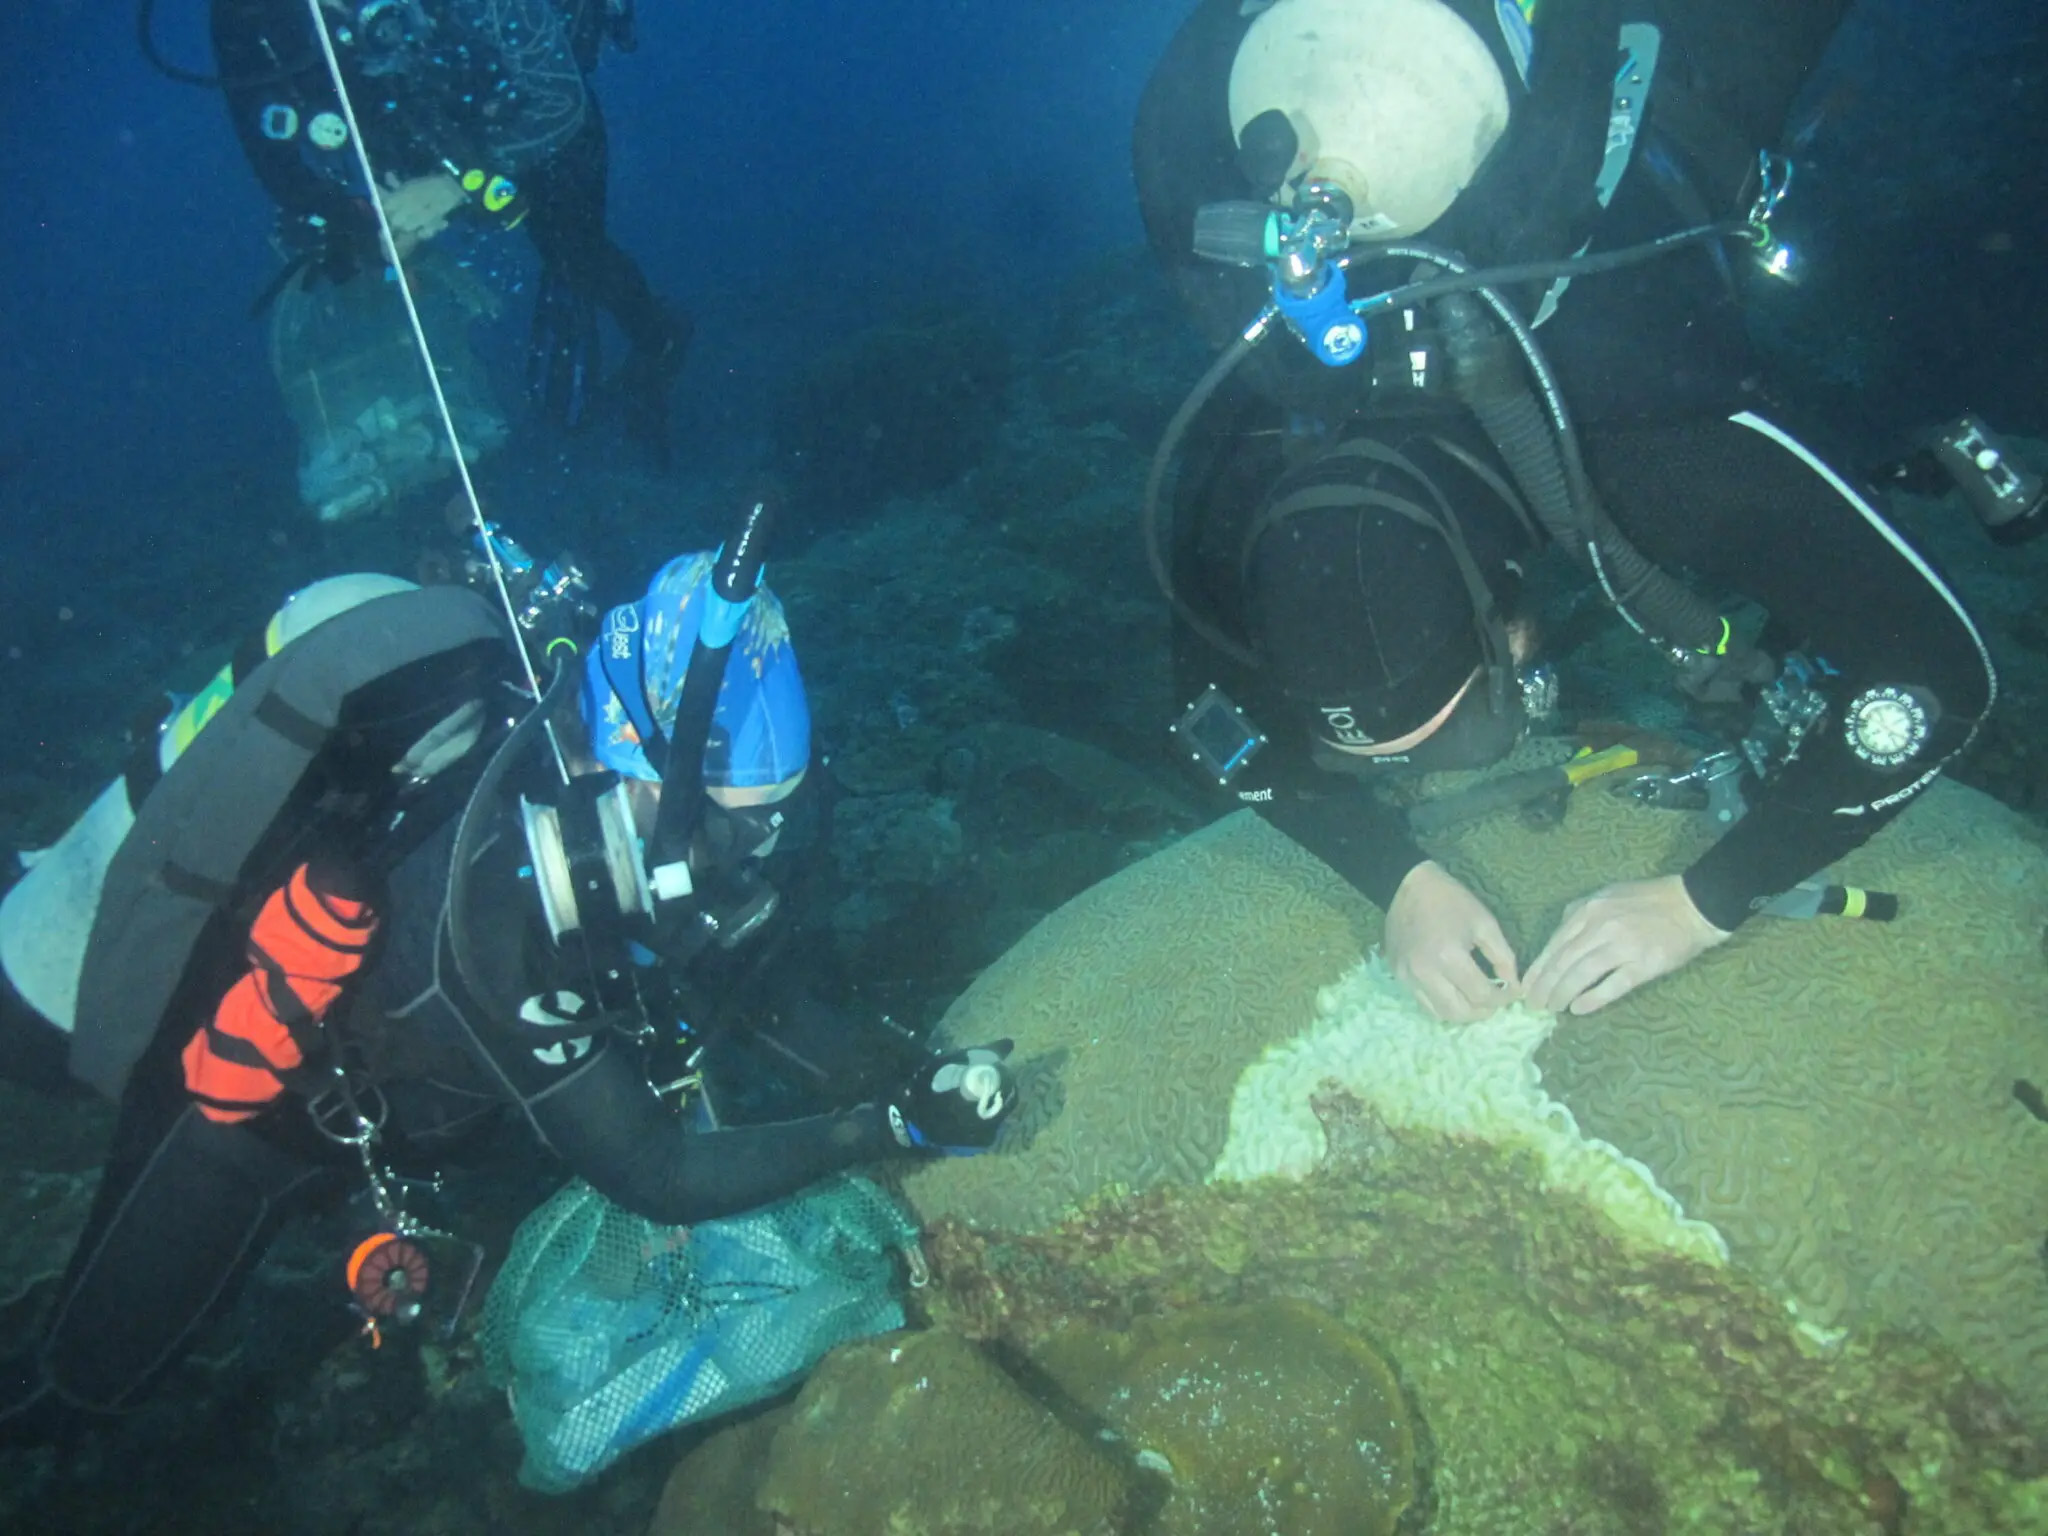 Two divers in scuba gear examine coral on the ocean floor.